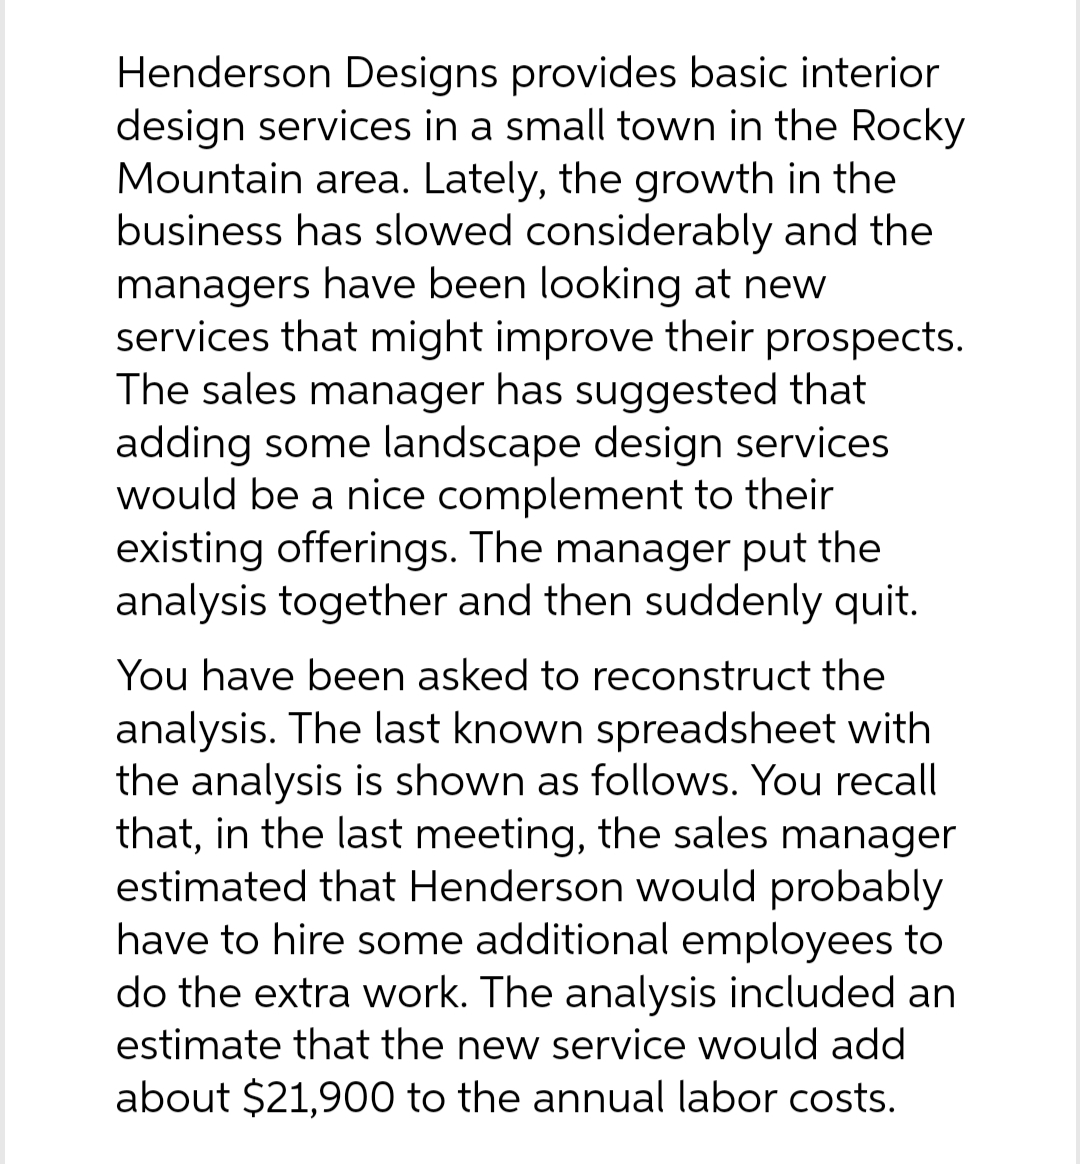 Henderson Designs provides basic interior
design services in a small town in the Rocky
Mountain area. Lately, the growth in the
business has slowed considerably and the
managers have been looking at new
services that might improve their prospects.
The sales manager has suggested that
adding some landscape design services
would be a nice complement to their
existing offerings. The manager put the
analysis together and then suddenly quit.
You have been asked to reconstruct the
analysis. The last known spreadsheet with
the analysis is shown as follows. You recall
that, in the last meeting, the sales manager
estimated that Henderson would probably
have to hire some additional employees to
do the extra work. The analysis included an
estimate that the new service would add
about $21,900 to the annual labor costs.